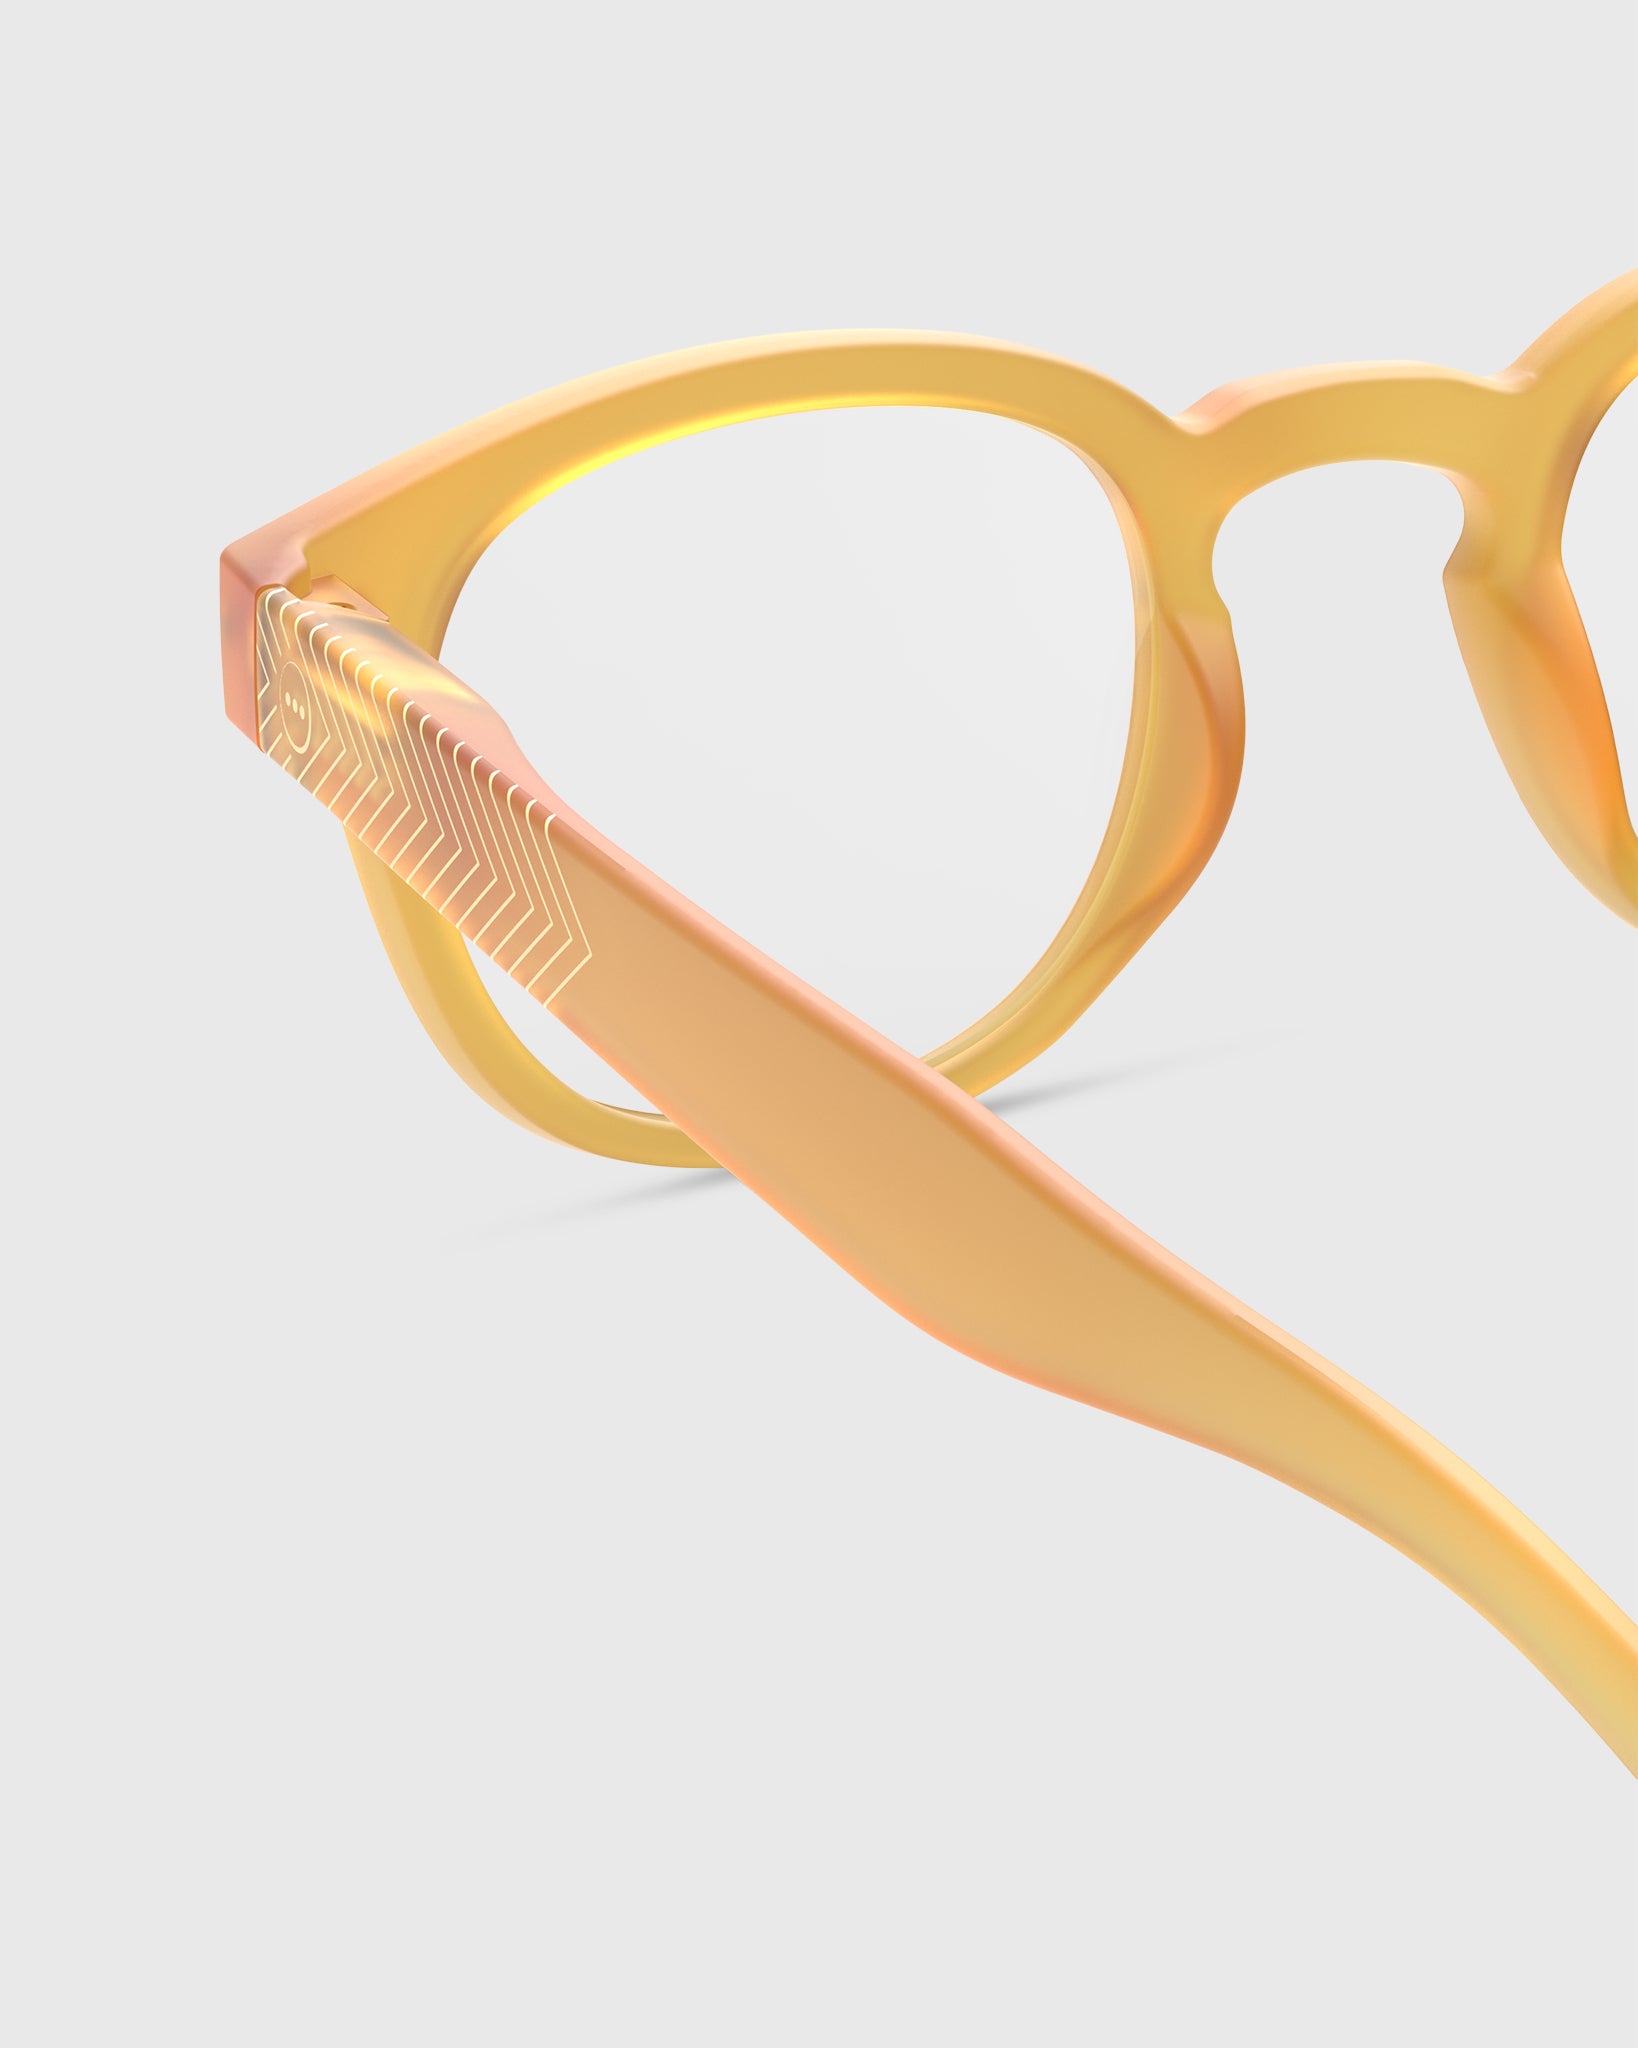 Limited Edition #C Reading Glasses in Golden Glow